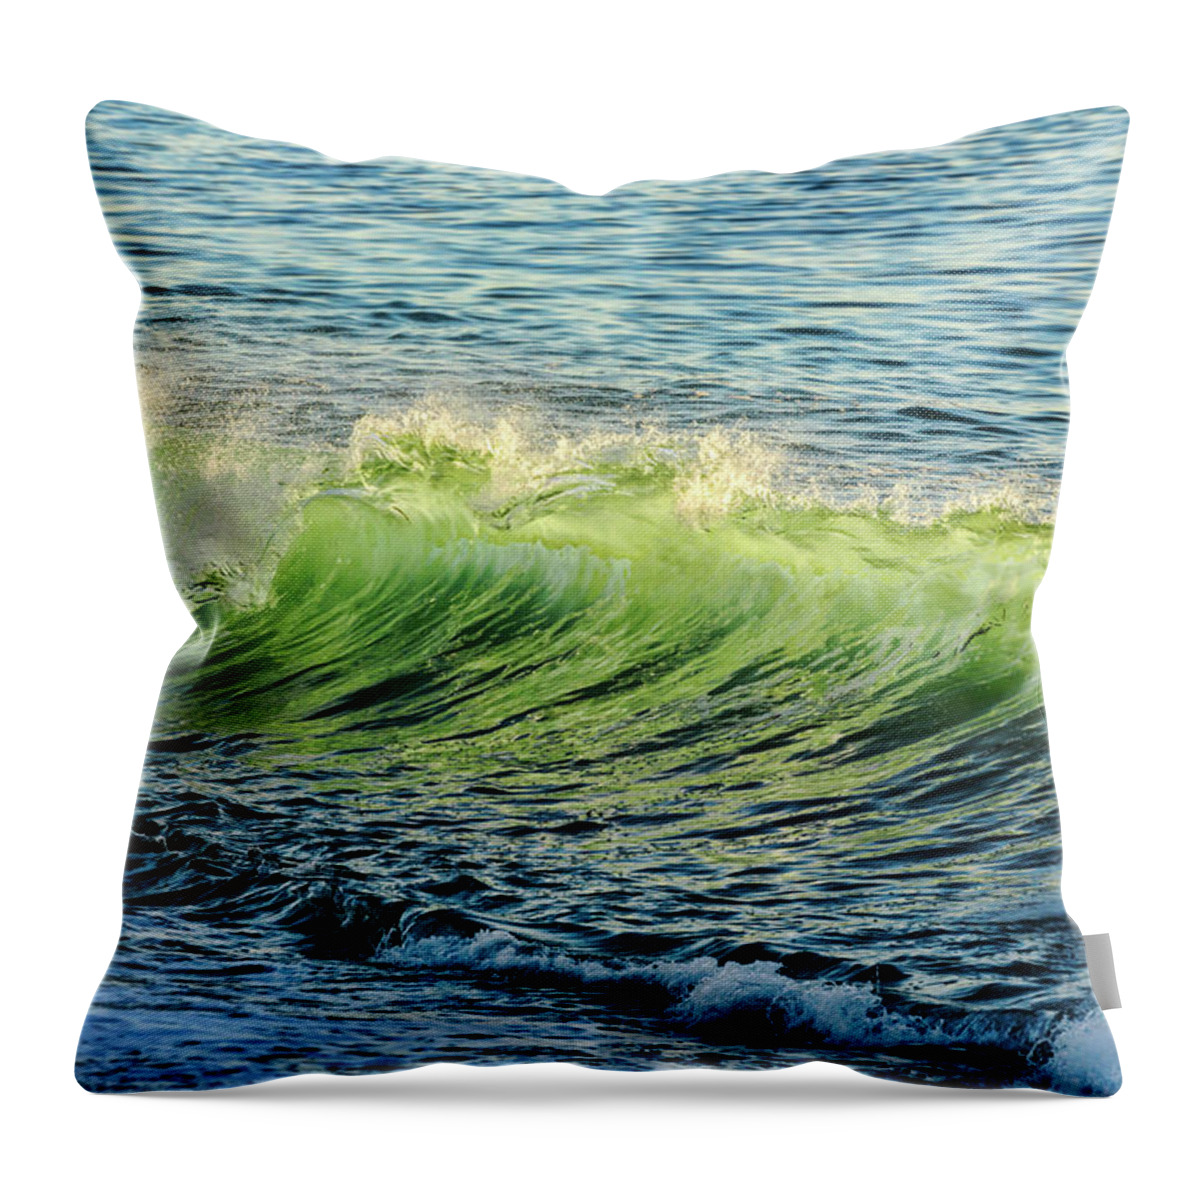 Crest Throw Pillow featuring the photograph Wave Crest by Kelley King